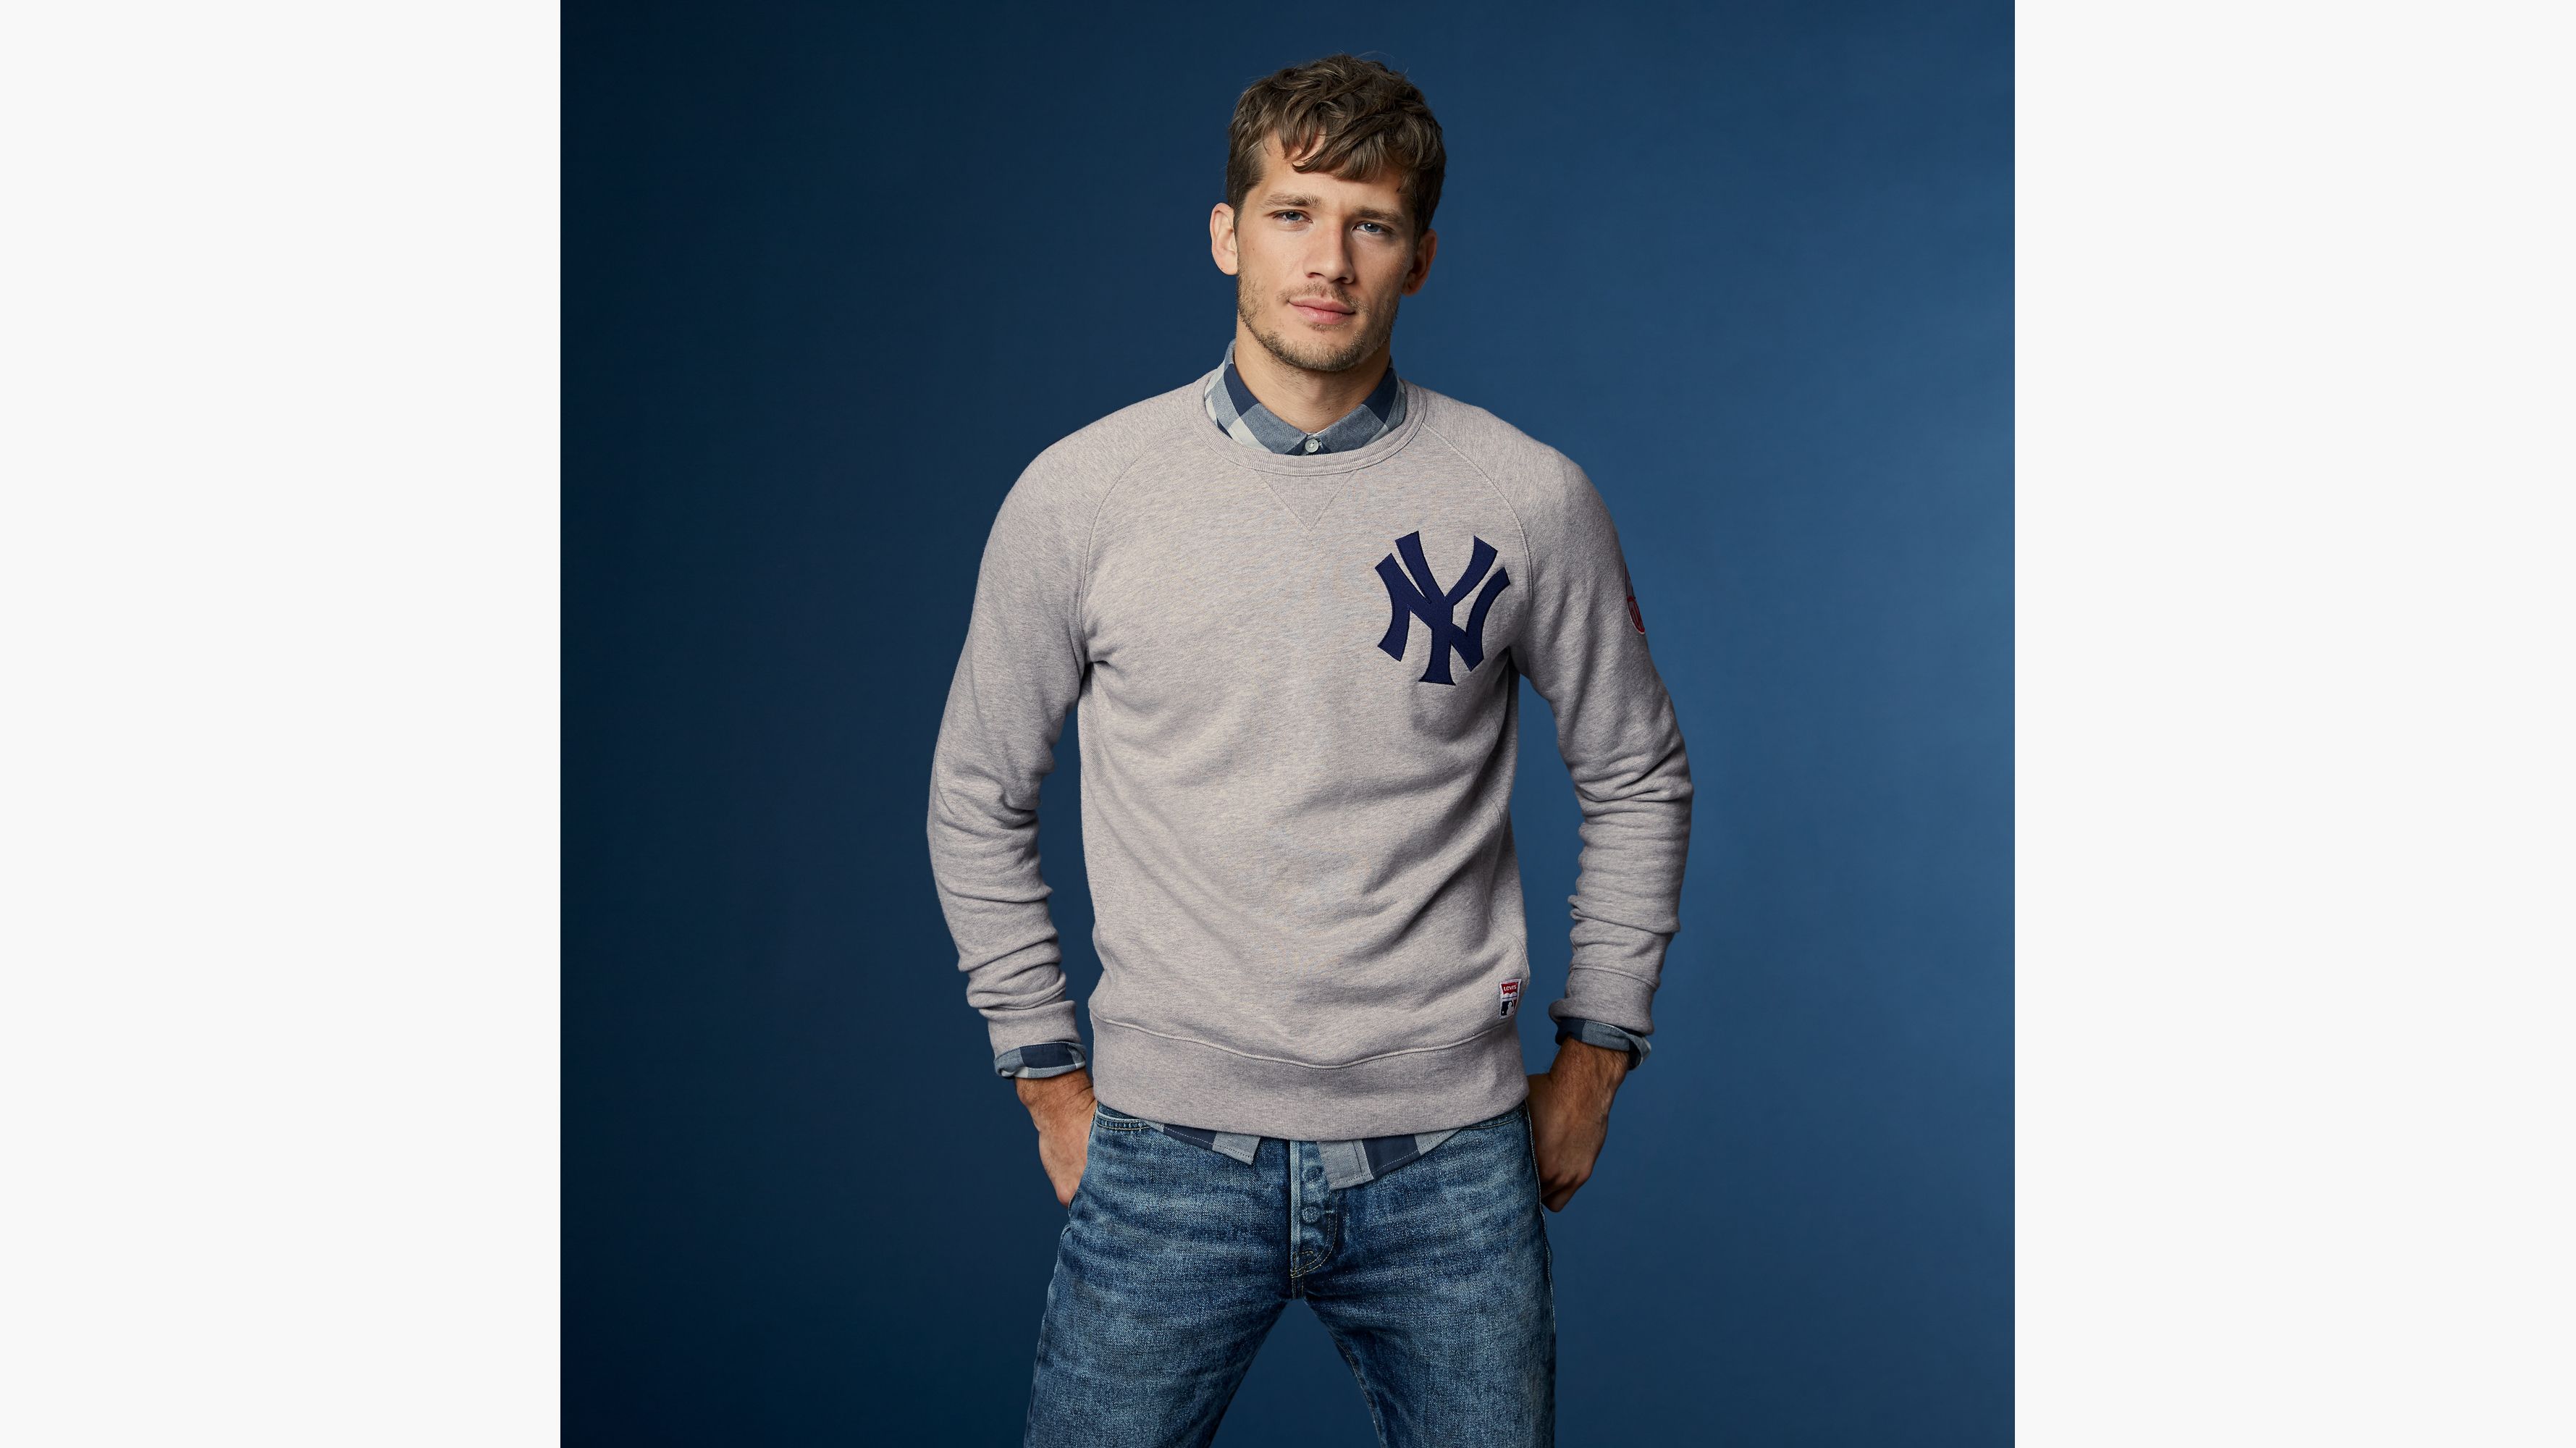 NY MLB HOODIE Mens Fashion Coats Jackets and Outerwear on Carousell